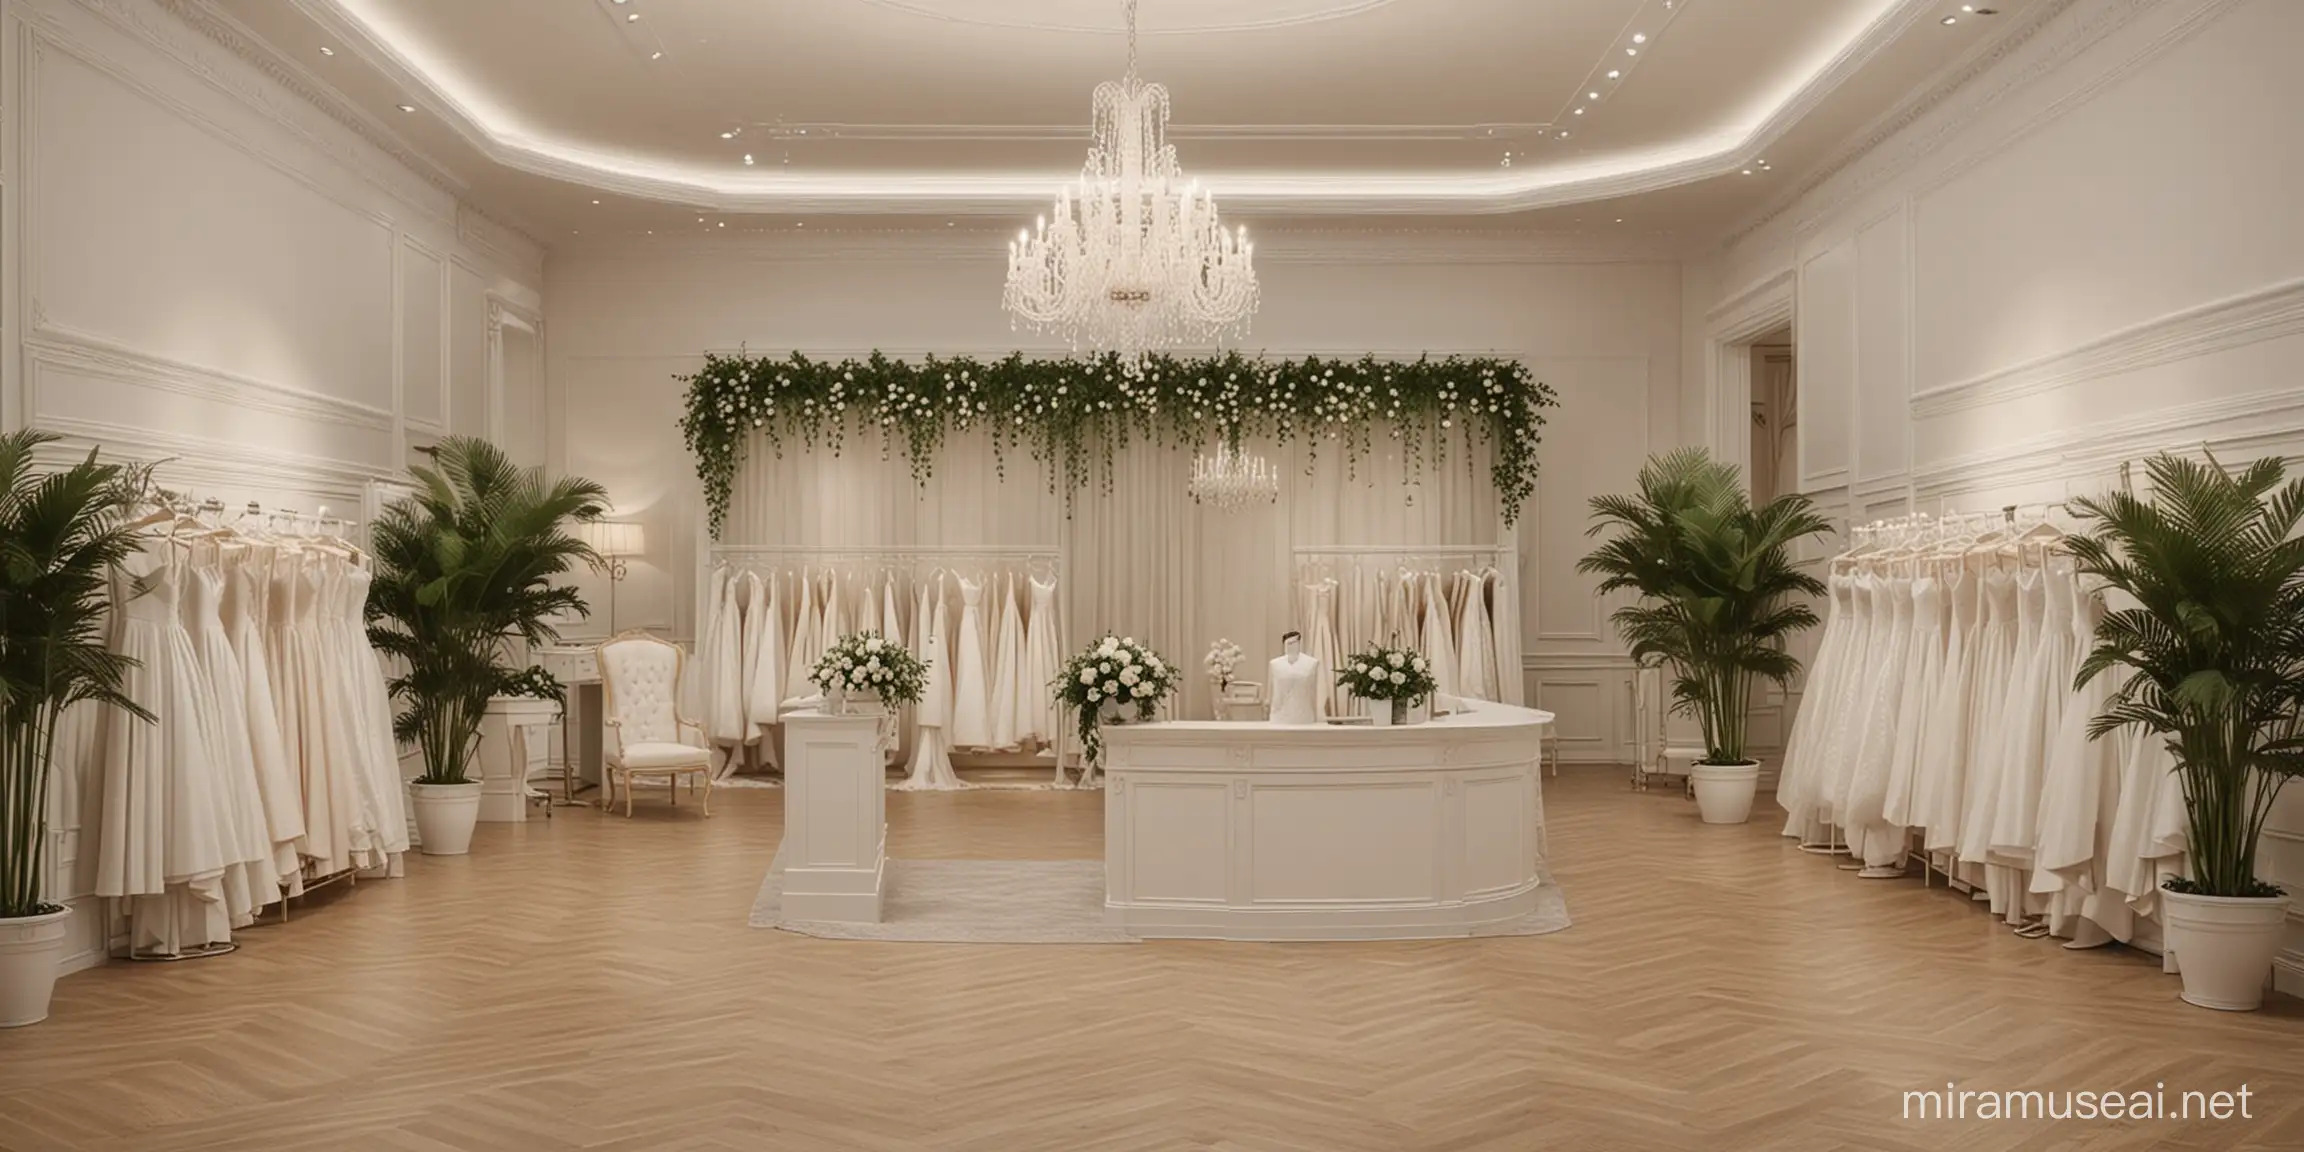  realistic luxurious  Elegant & Classic Wedding Dress Store Design.
with a welcome desk area,
 and a seating area.
with the area that we need to use for photo of the bride purchased the gown.
can move or build more dress hangers.
with small plants
